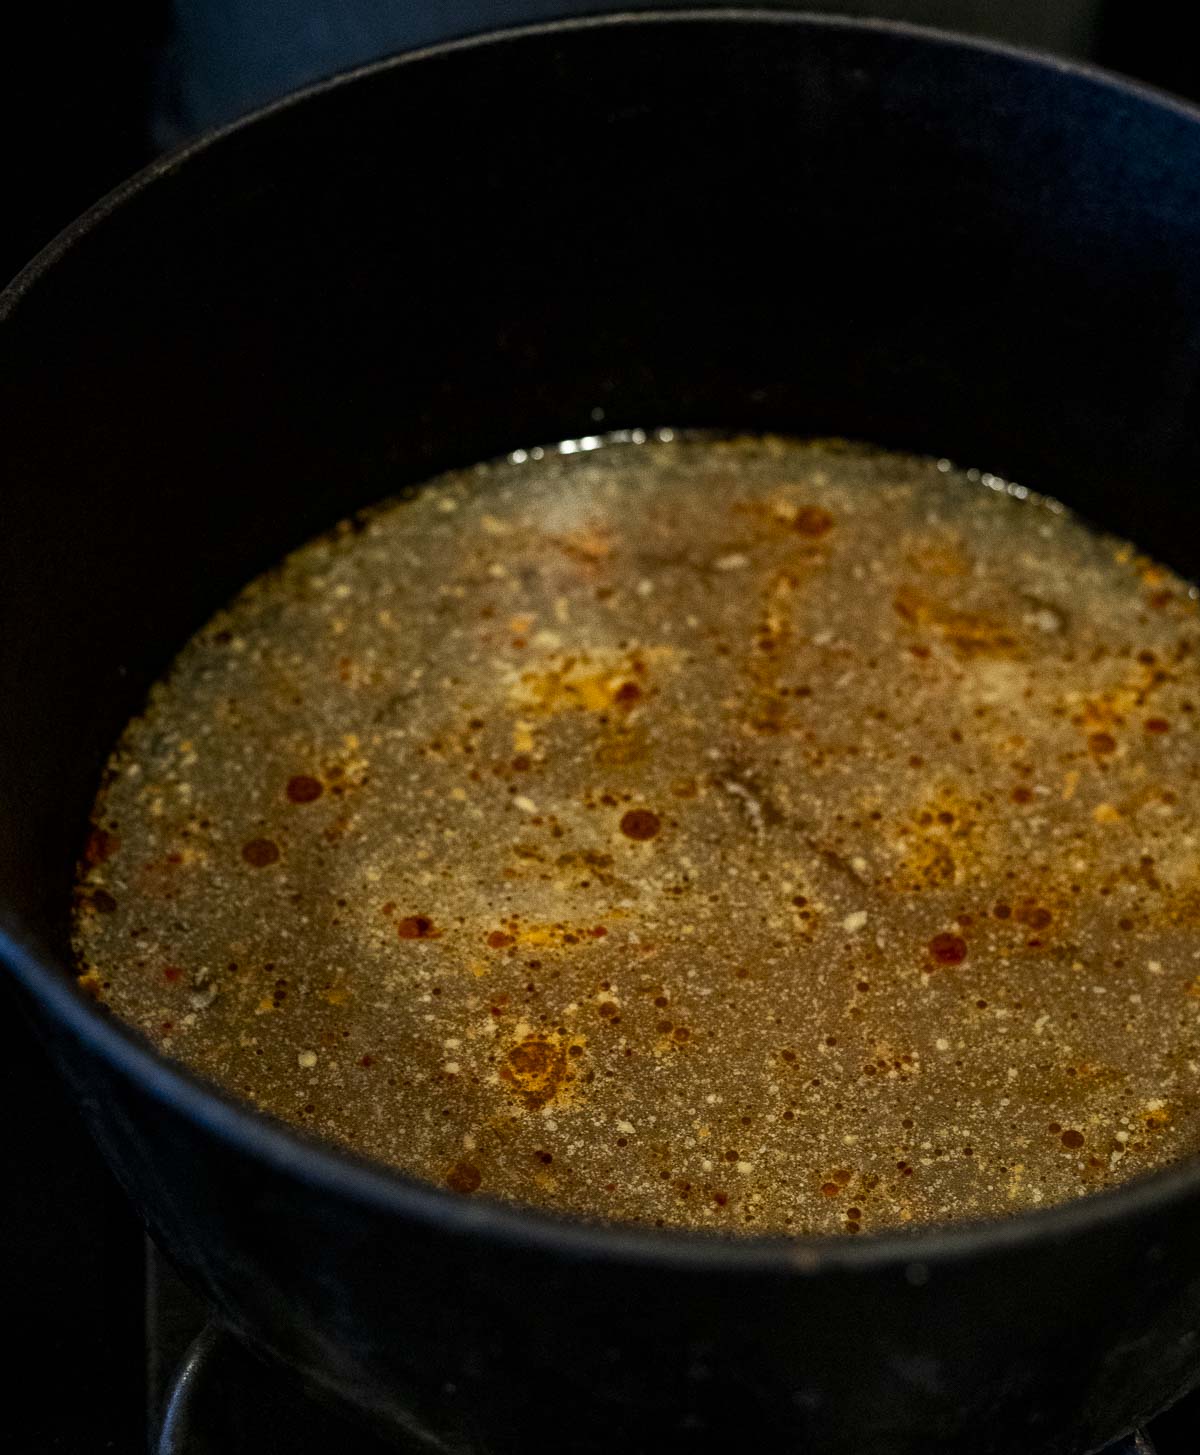 Ramen broth simmering in a large pot.